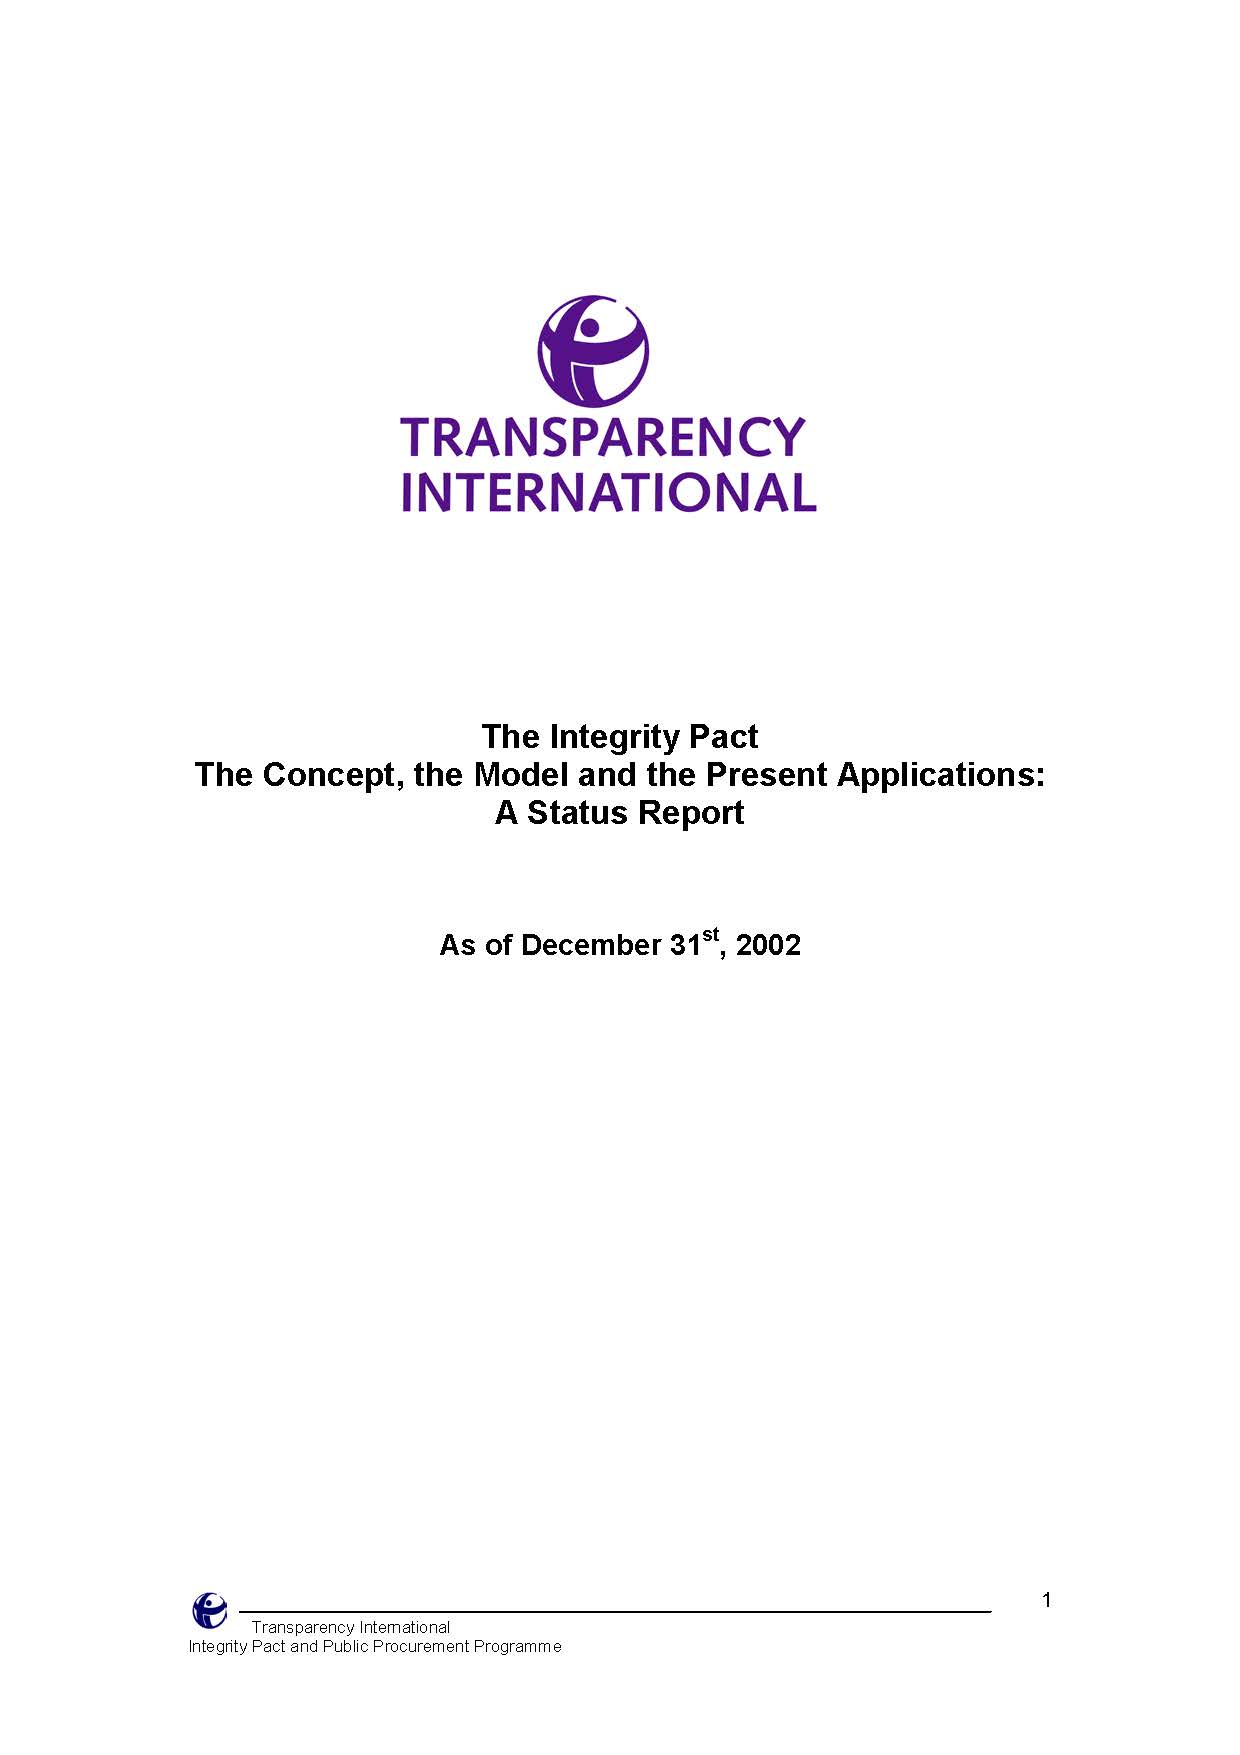 Pages from TI_The Integrity Pact A Status Report_2002.jpg